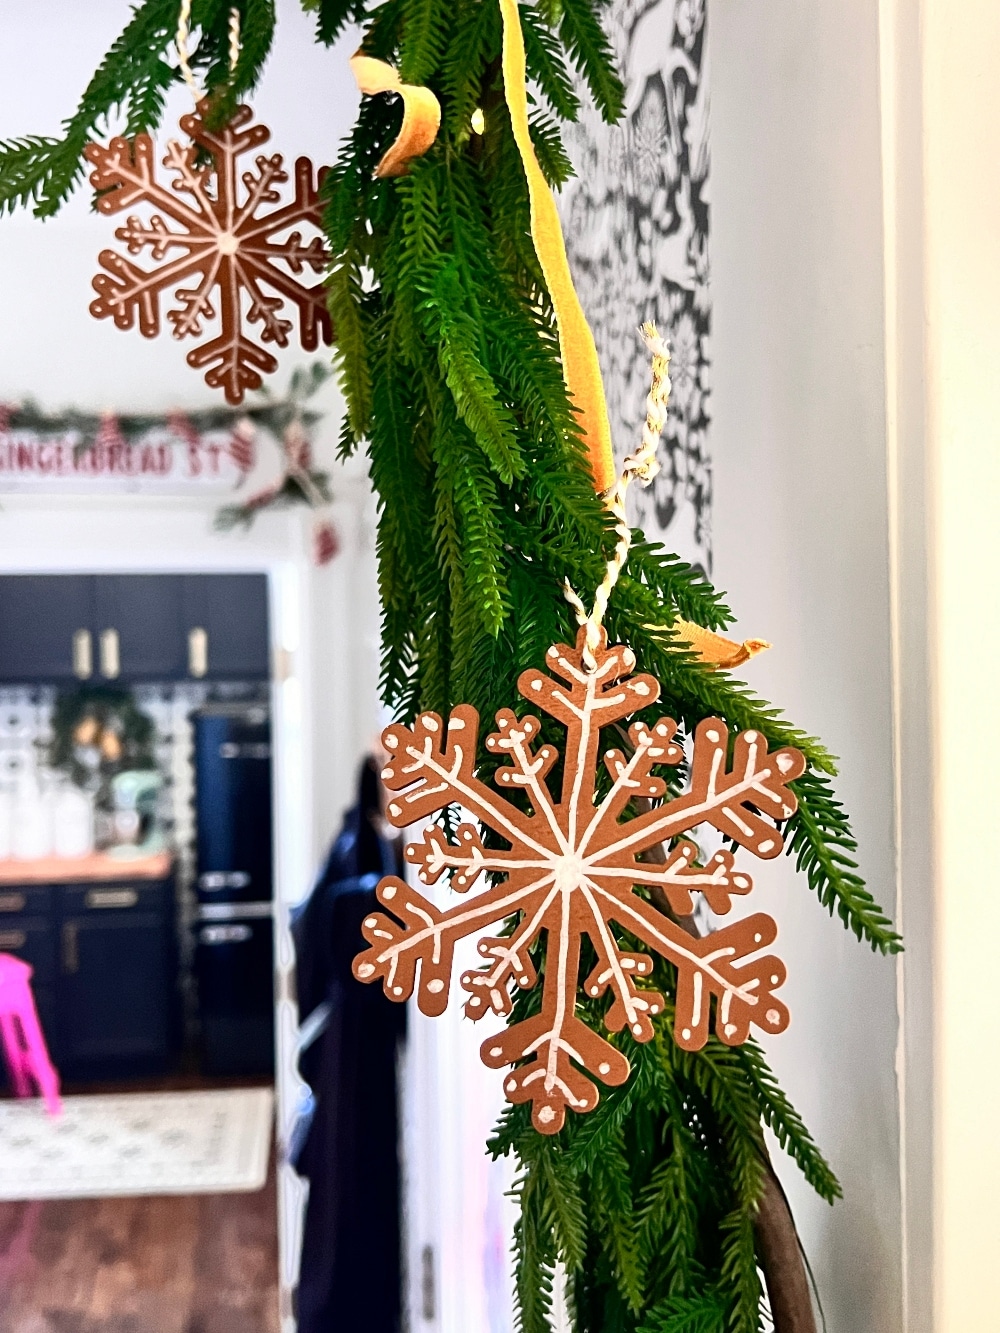 DIY Faux Gingerbread Cookie Ornaments. Transform simple wood snowflake ornaments into charming faux gingerbread cookies for a decoration that adds a touch of sugary sweetness to your holiday decor.